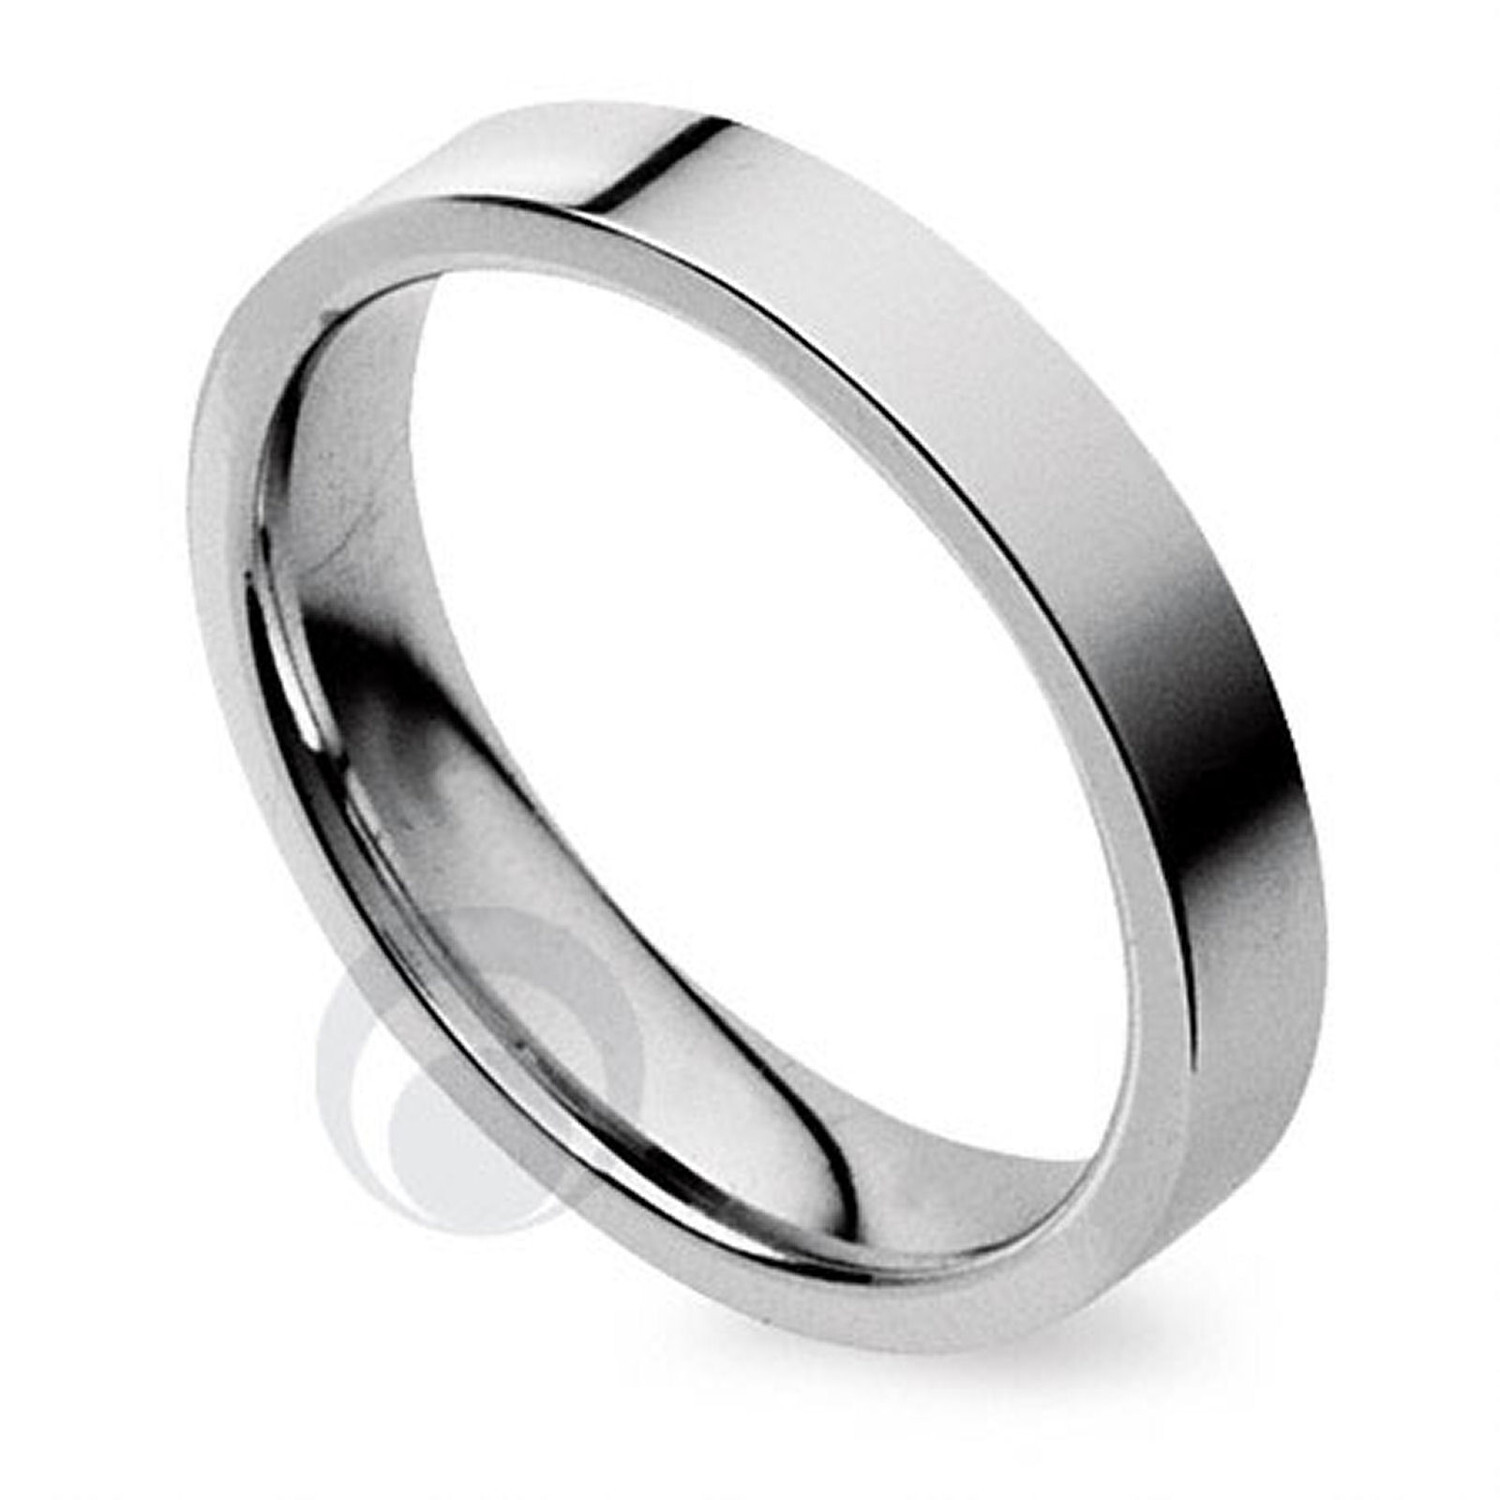 Mens Wedding Ring Solid 950 Platinum Plain Available in All Sizes | eBay